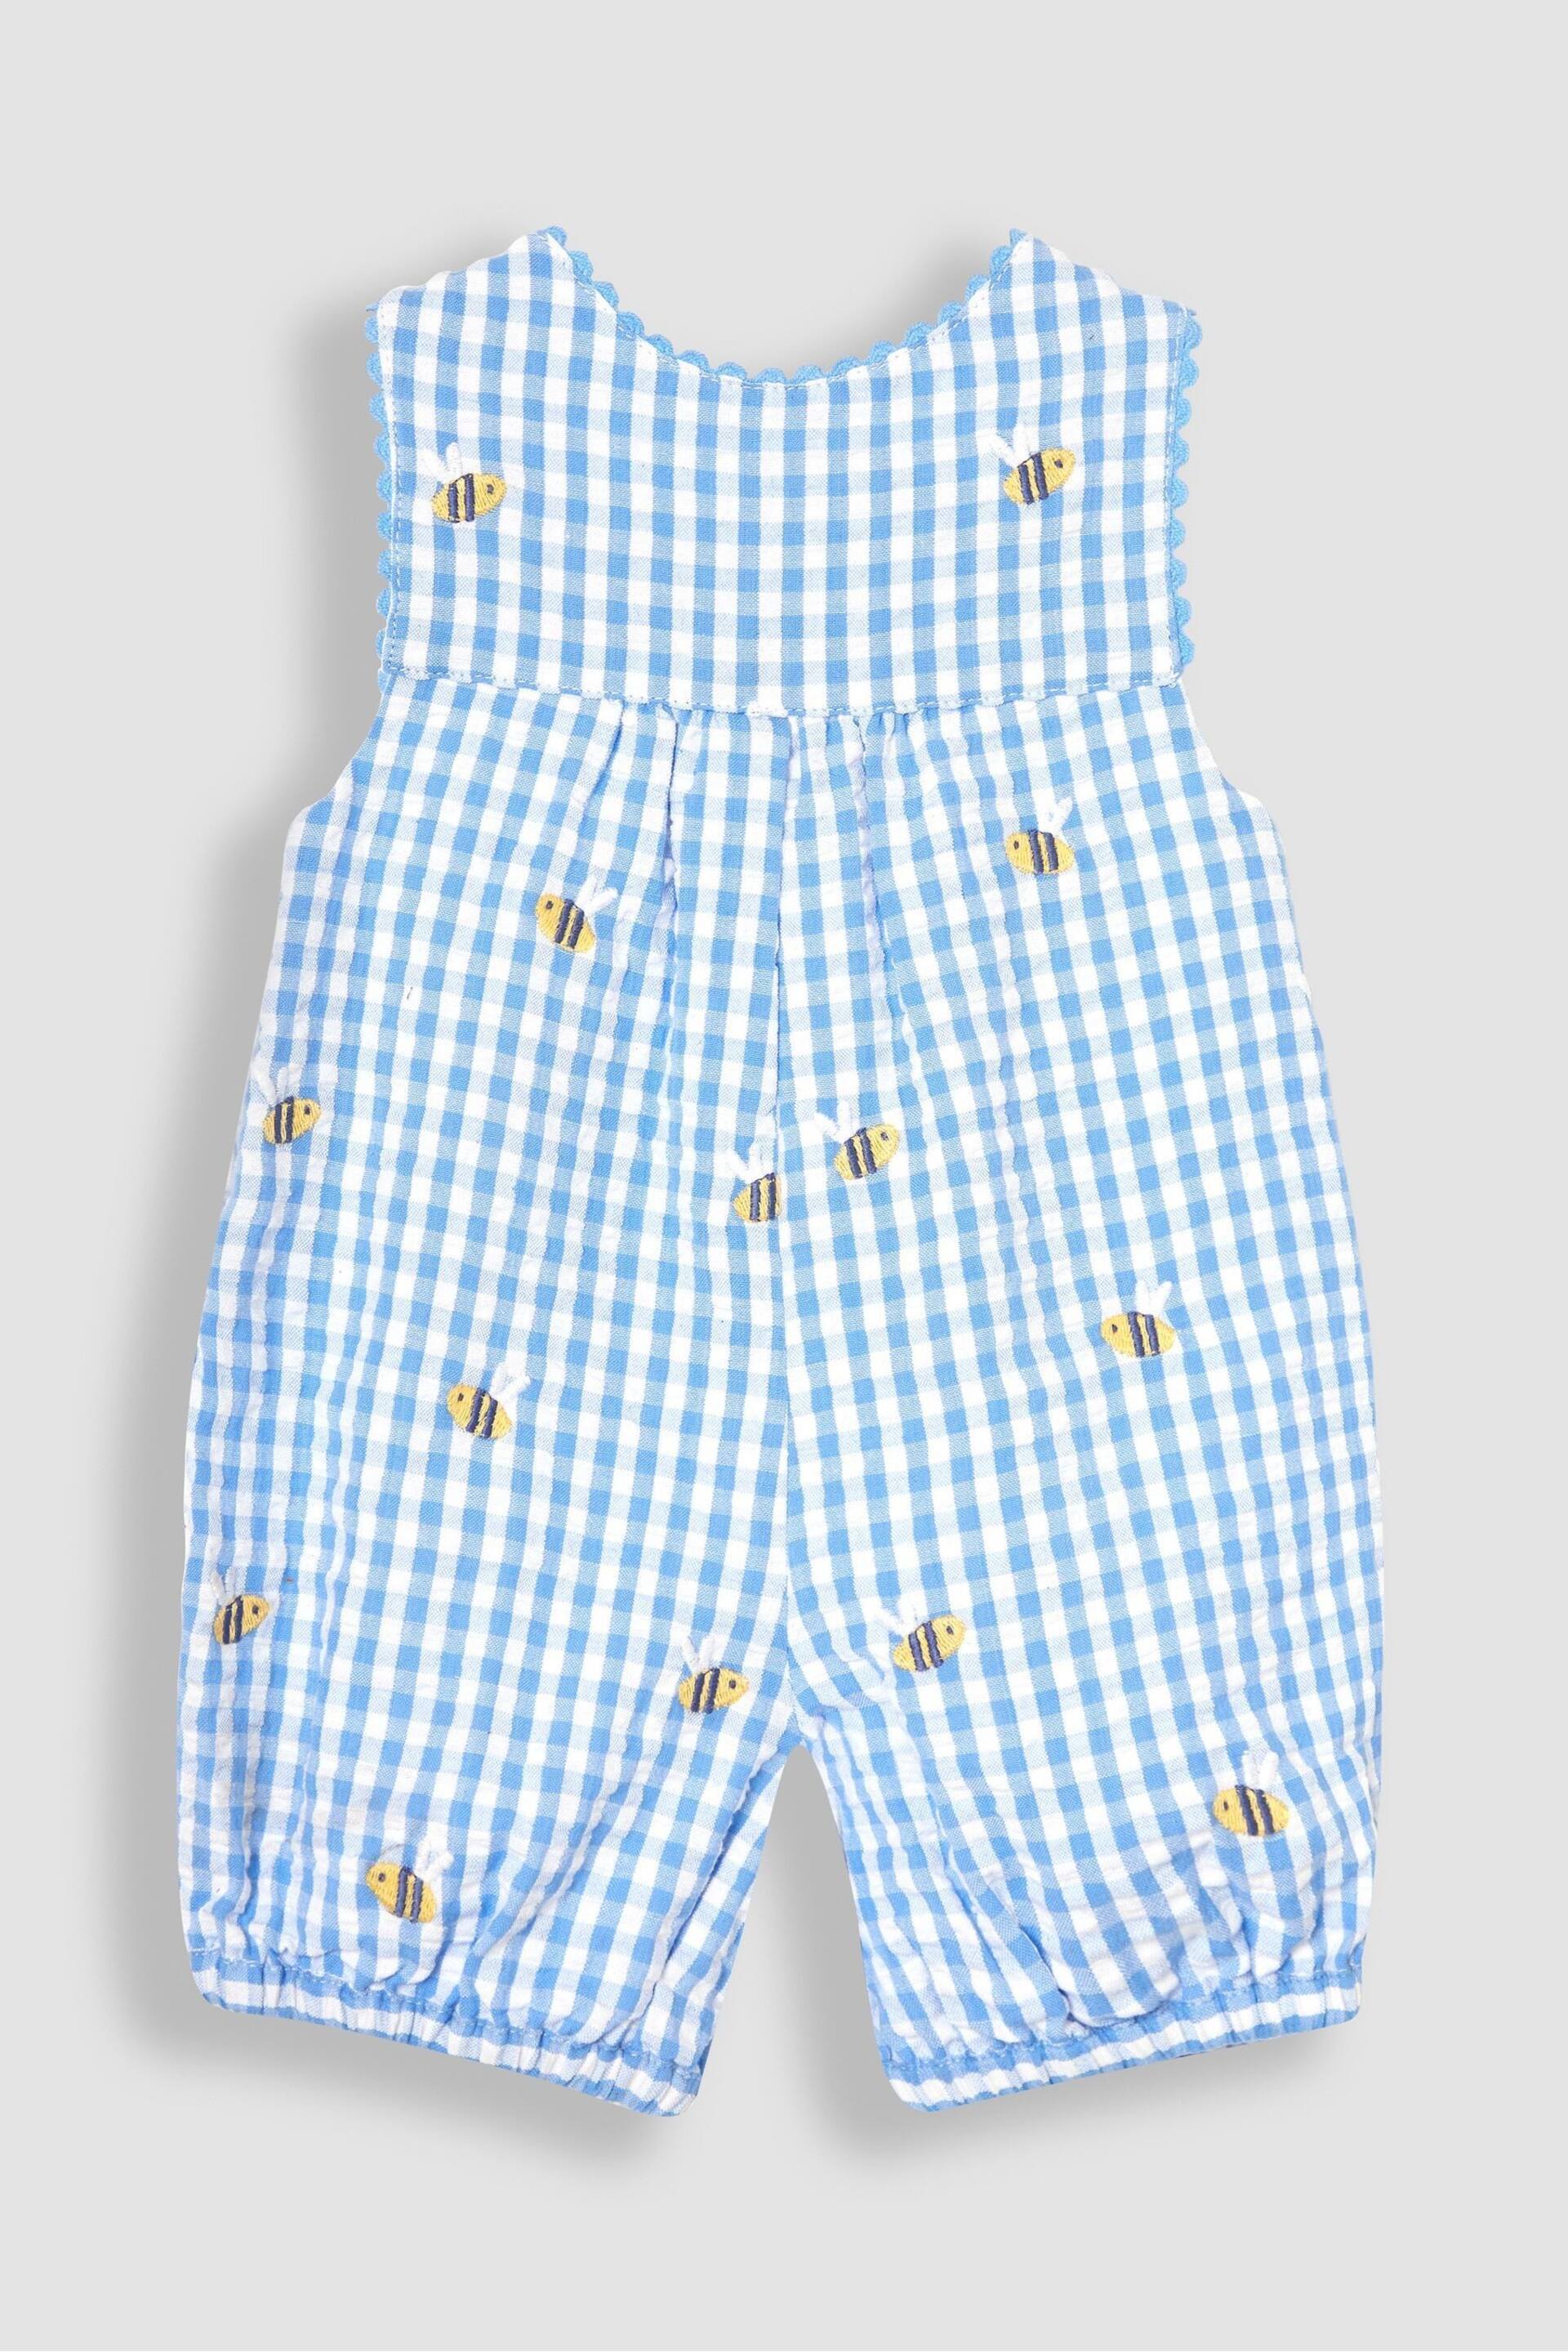 JoJo Maman Bébé Blue Bee Embroidered Gingham Dungarees - Image 2 of 3